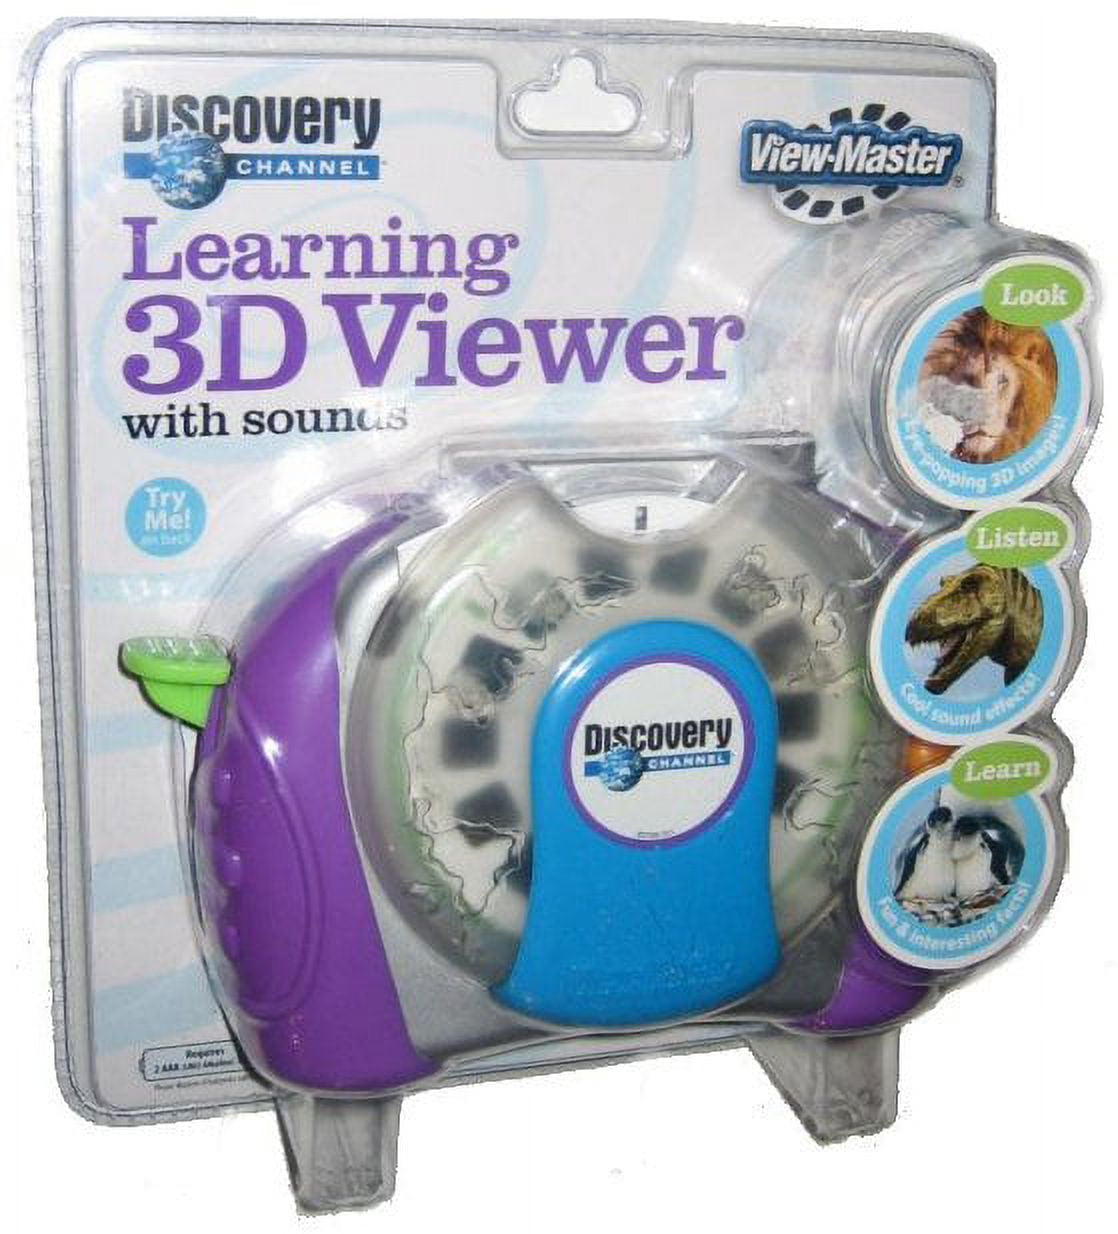 Fisher-Price View-Master Discovery Channel 3D Learning Viewer w